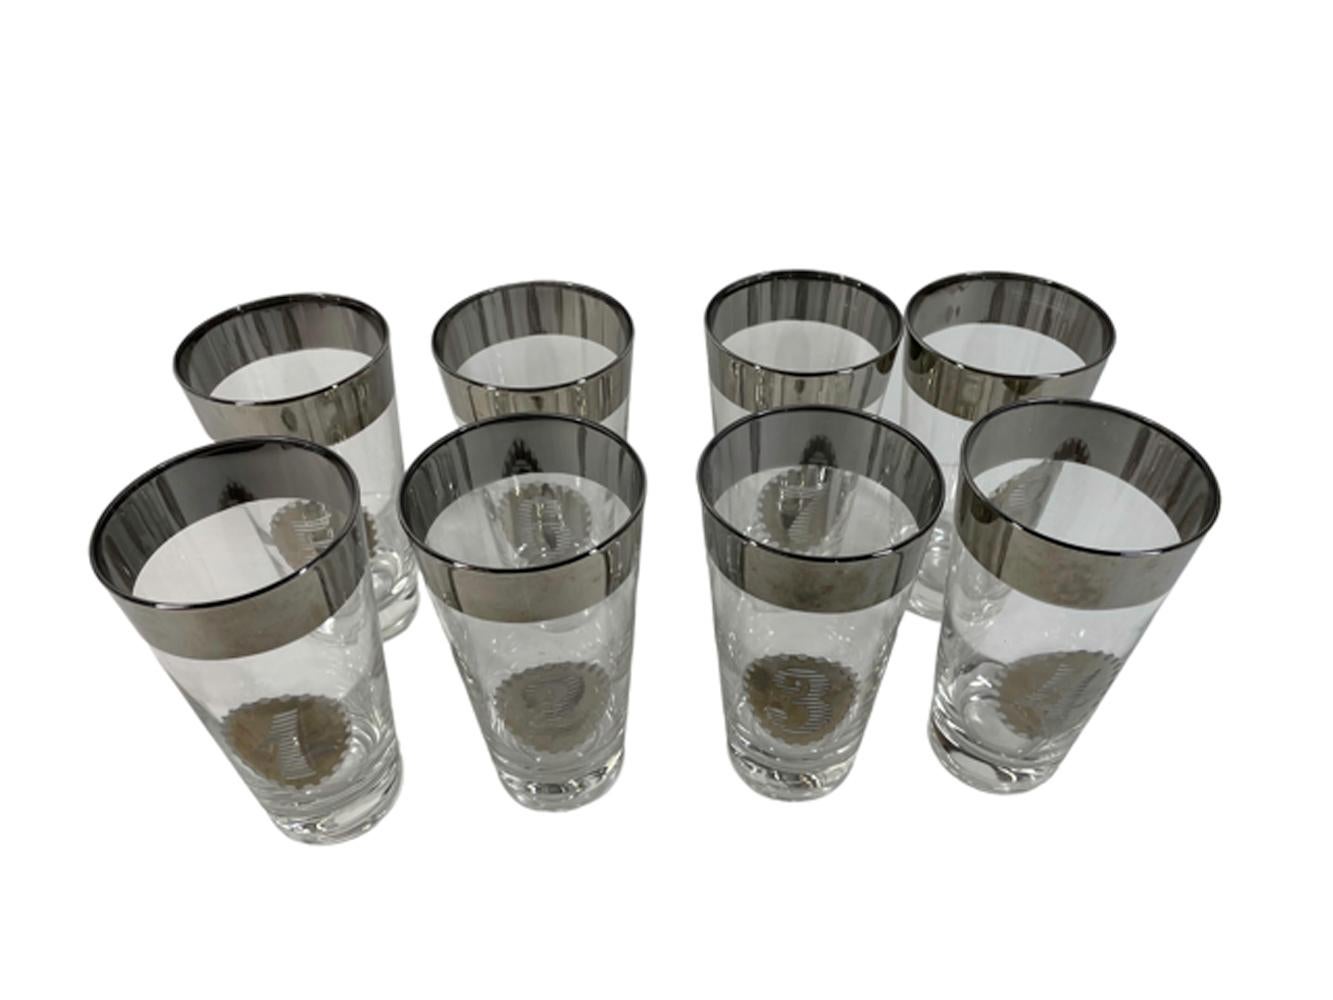 American MCM Silver Decorated Highball Glasses Numbered 1 to 8 and Marked Metalyte For Sale